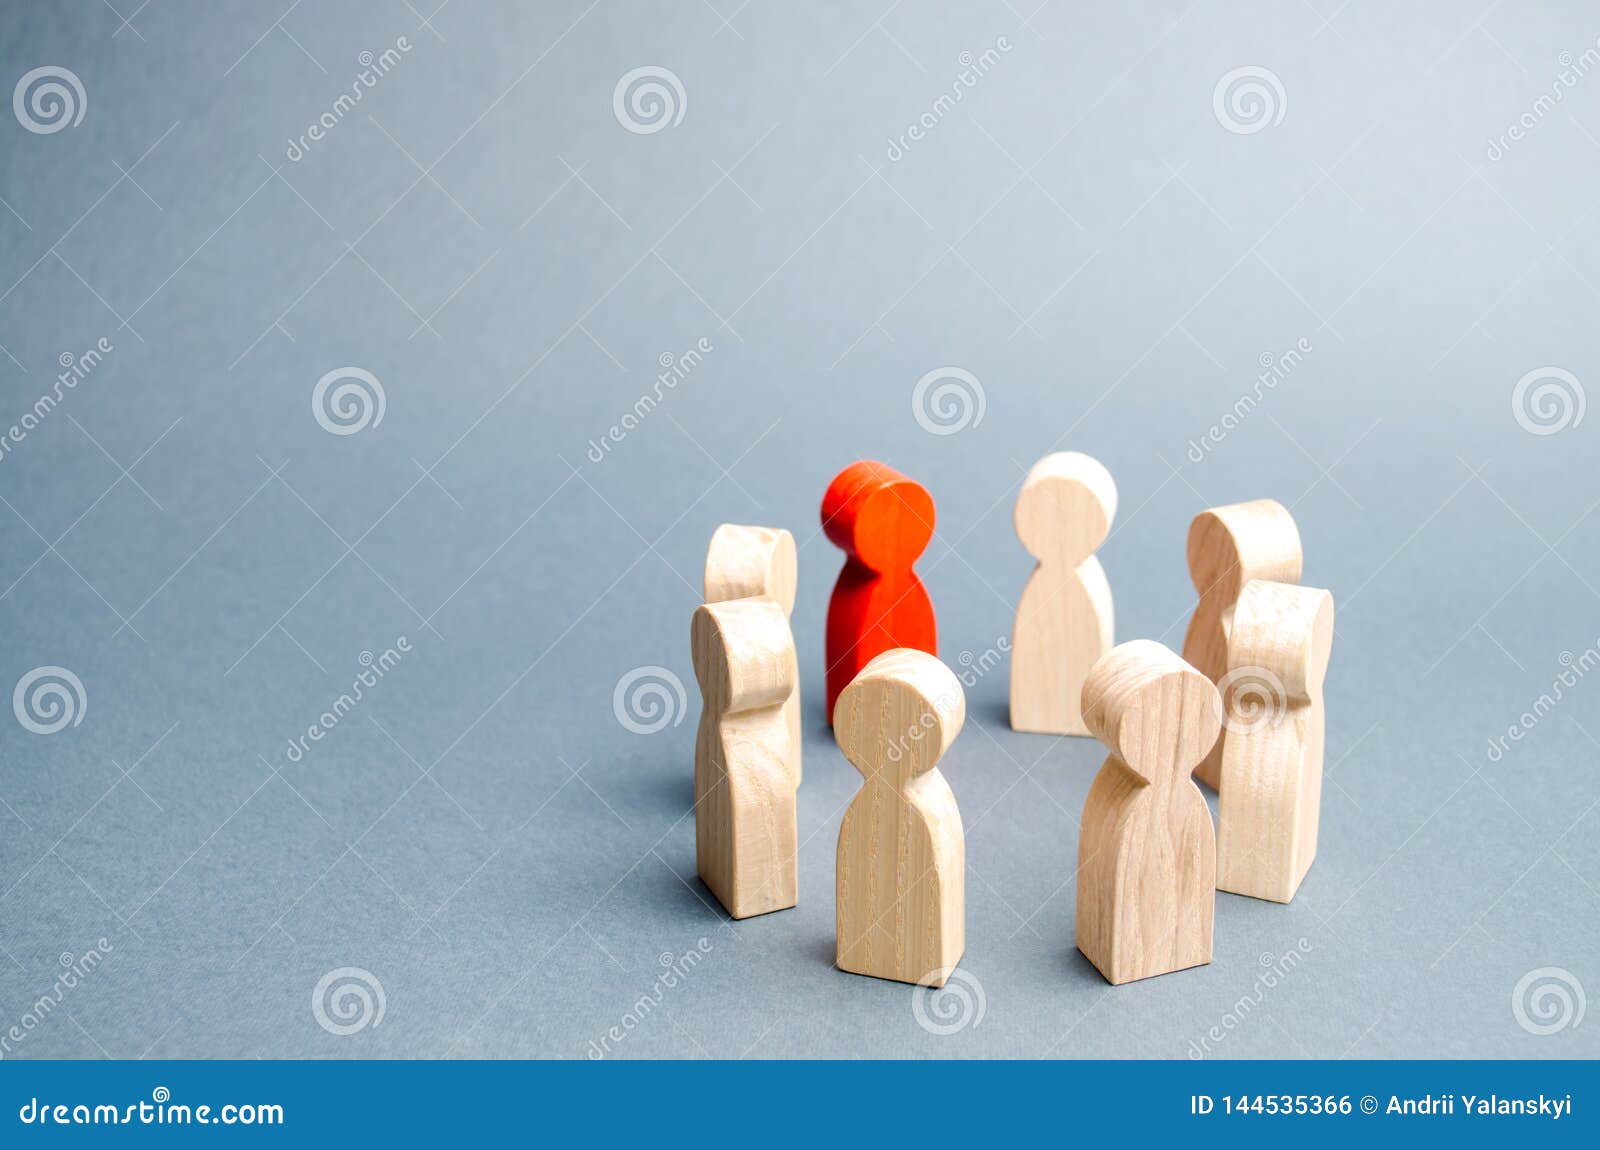 people stand in a circle on a gray background. communication. business team, teamwork, team spirit. wooden figures of people. a